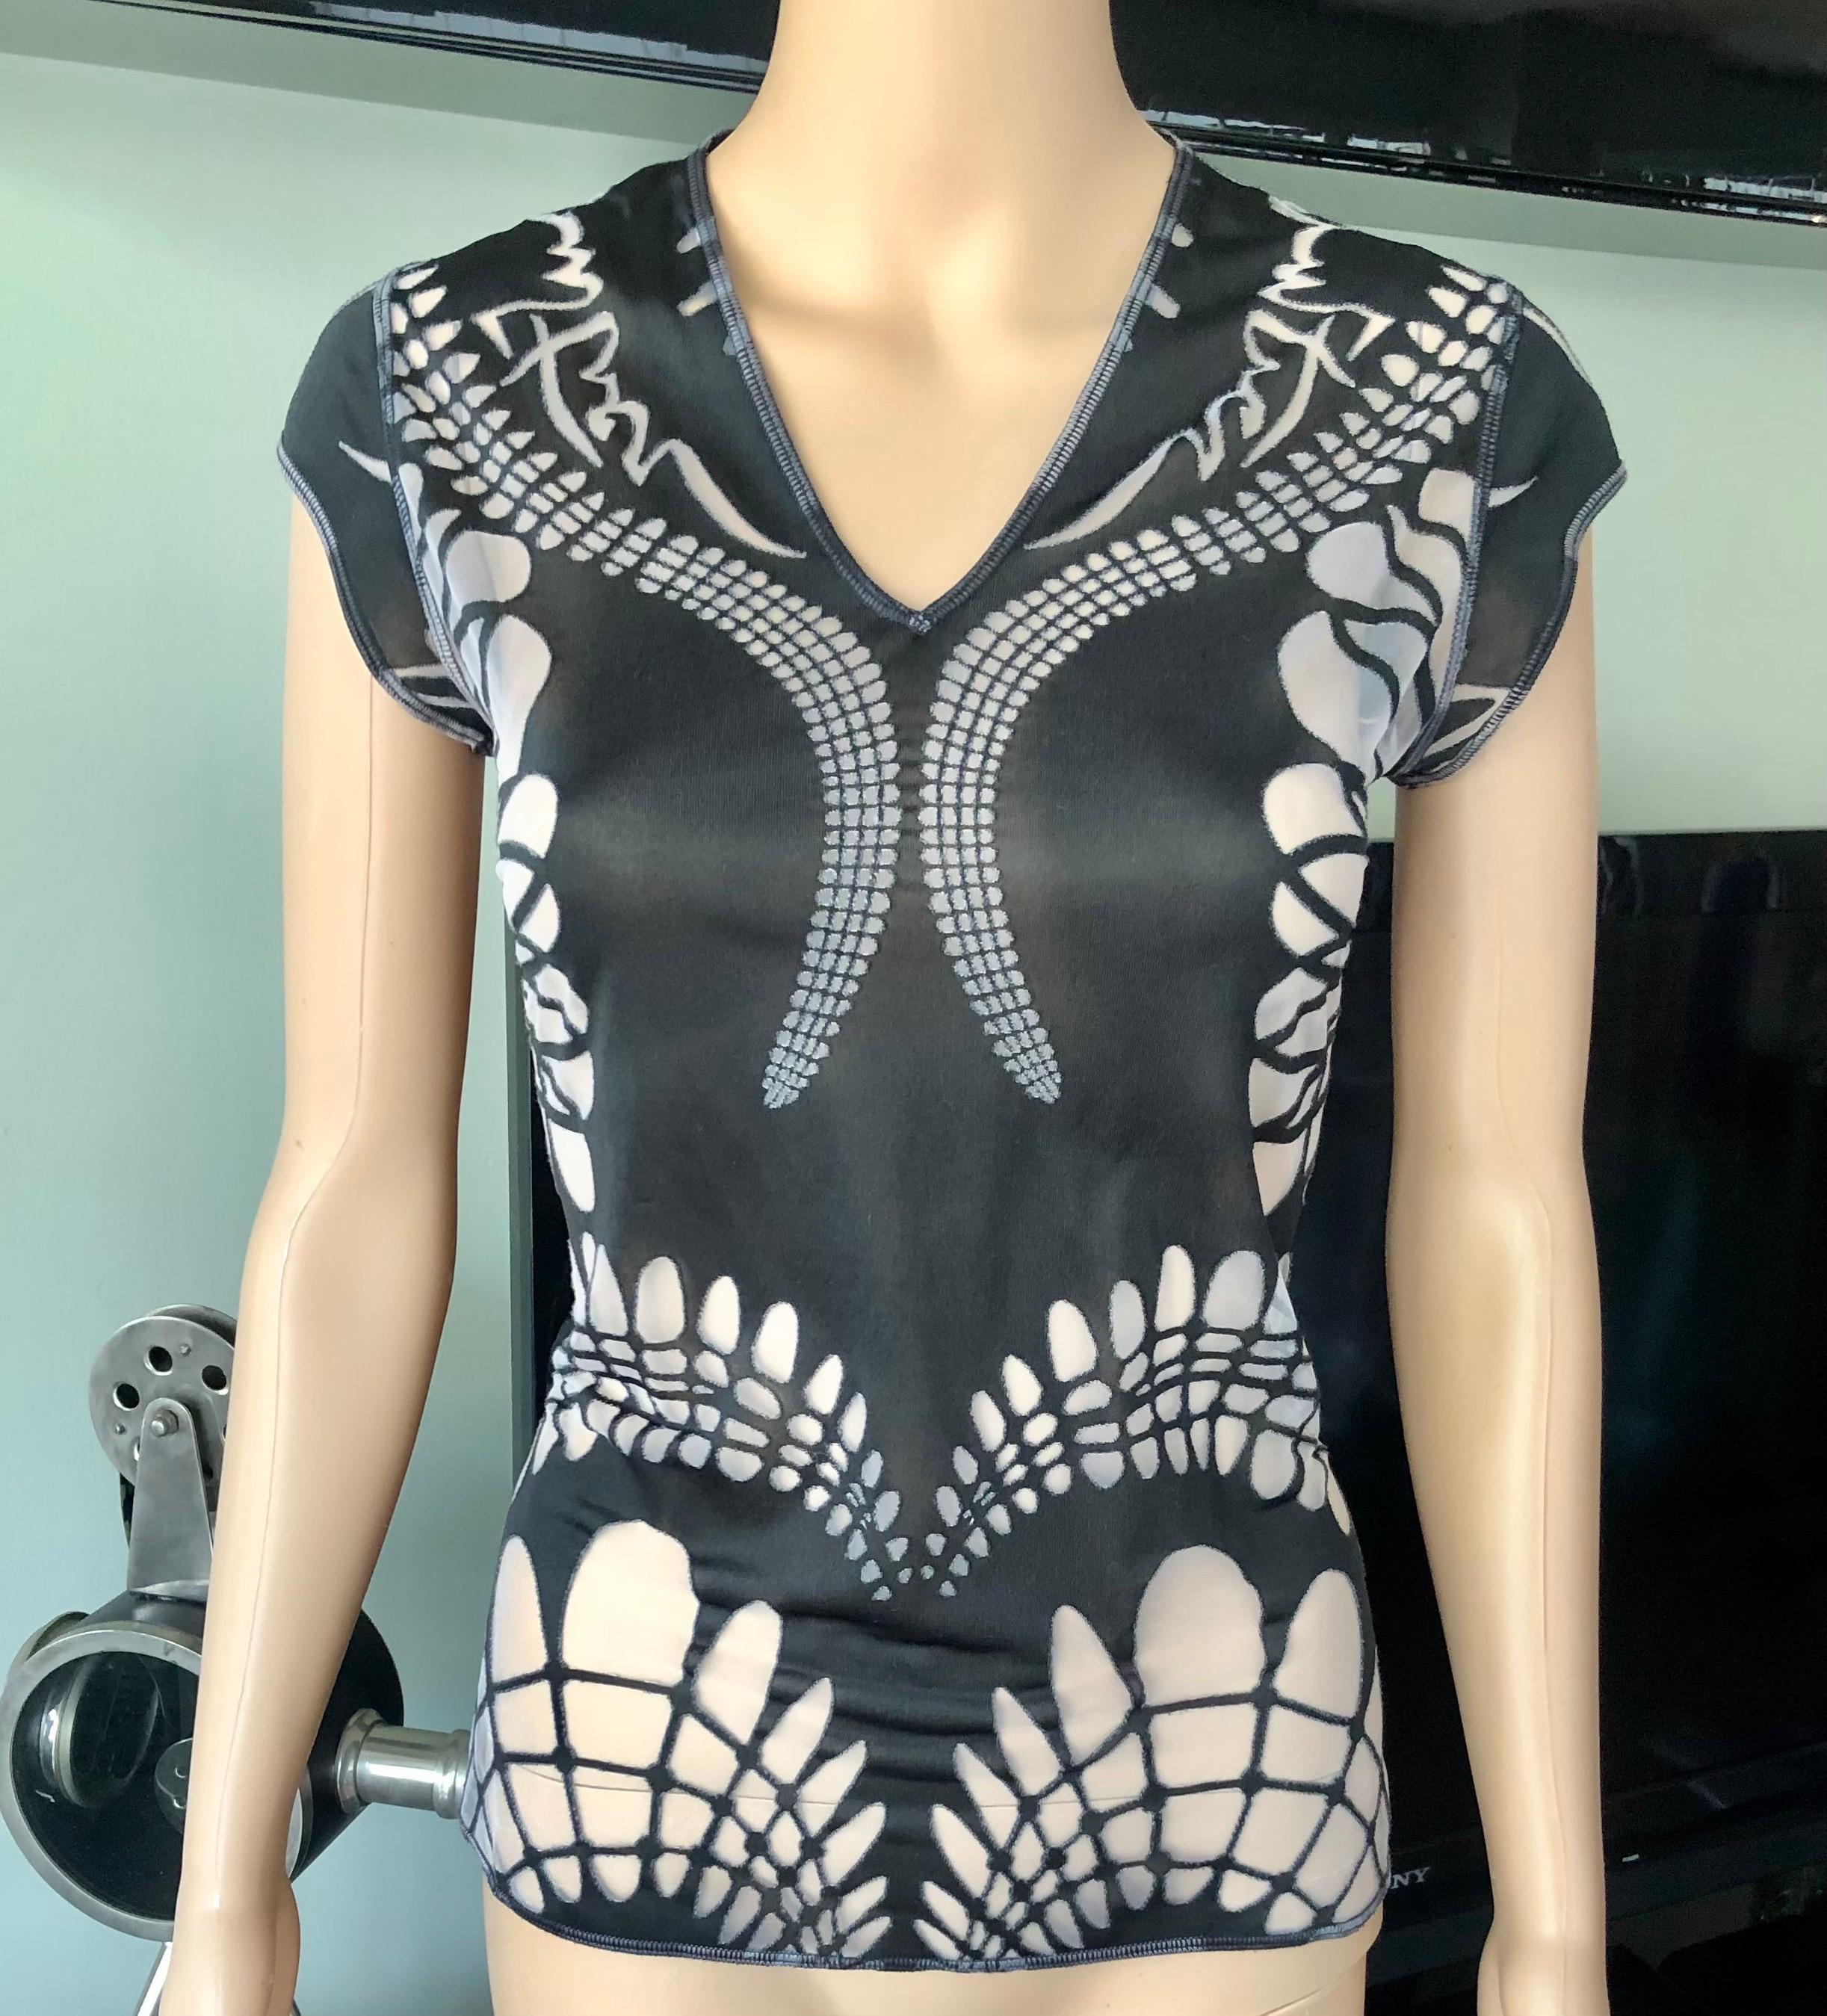 Jean Paul Gaultier S/S 2001 Logo Cutout Semi-Sheer Black Top In Good Condition For Sale In Naples, FL